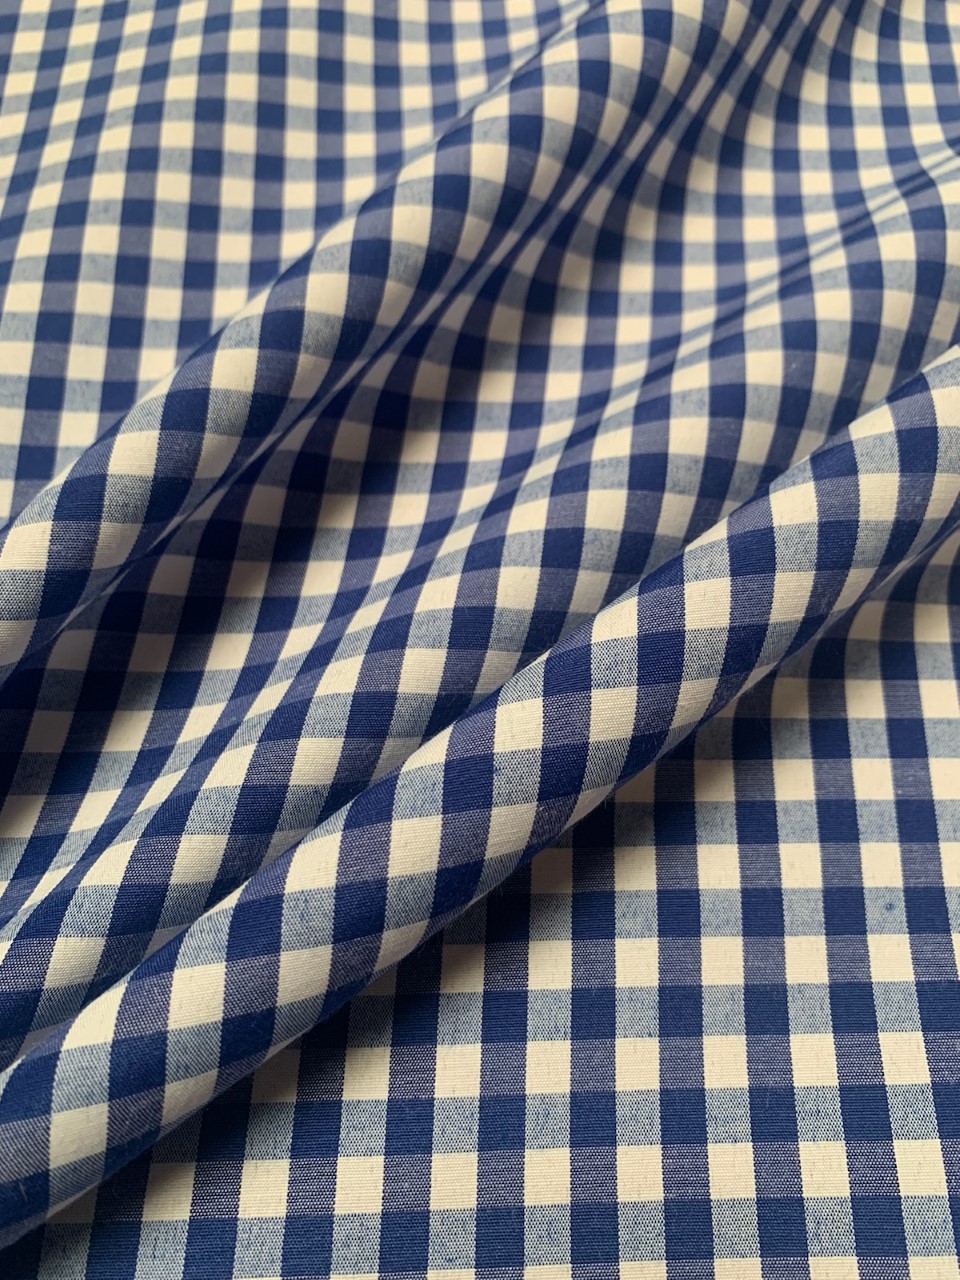 1/4" Royal Gingham Fabric 60" Wide By The Yard Poly Cotton Blend